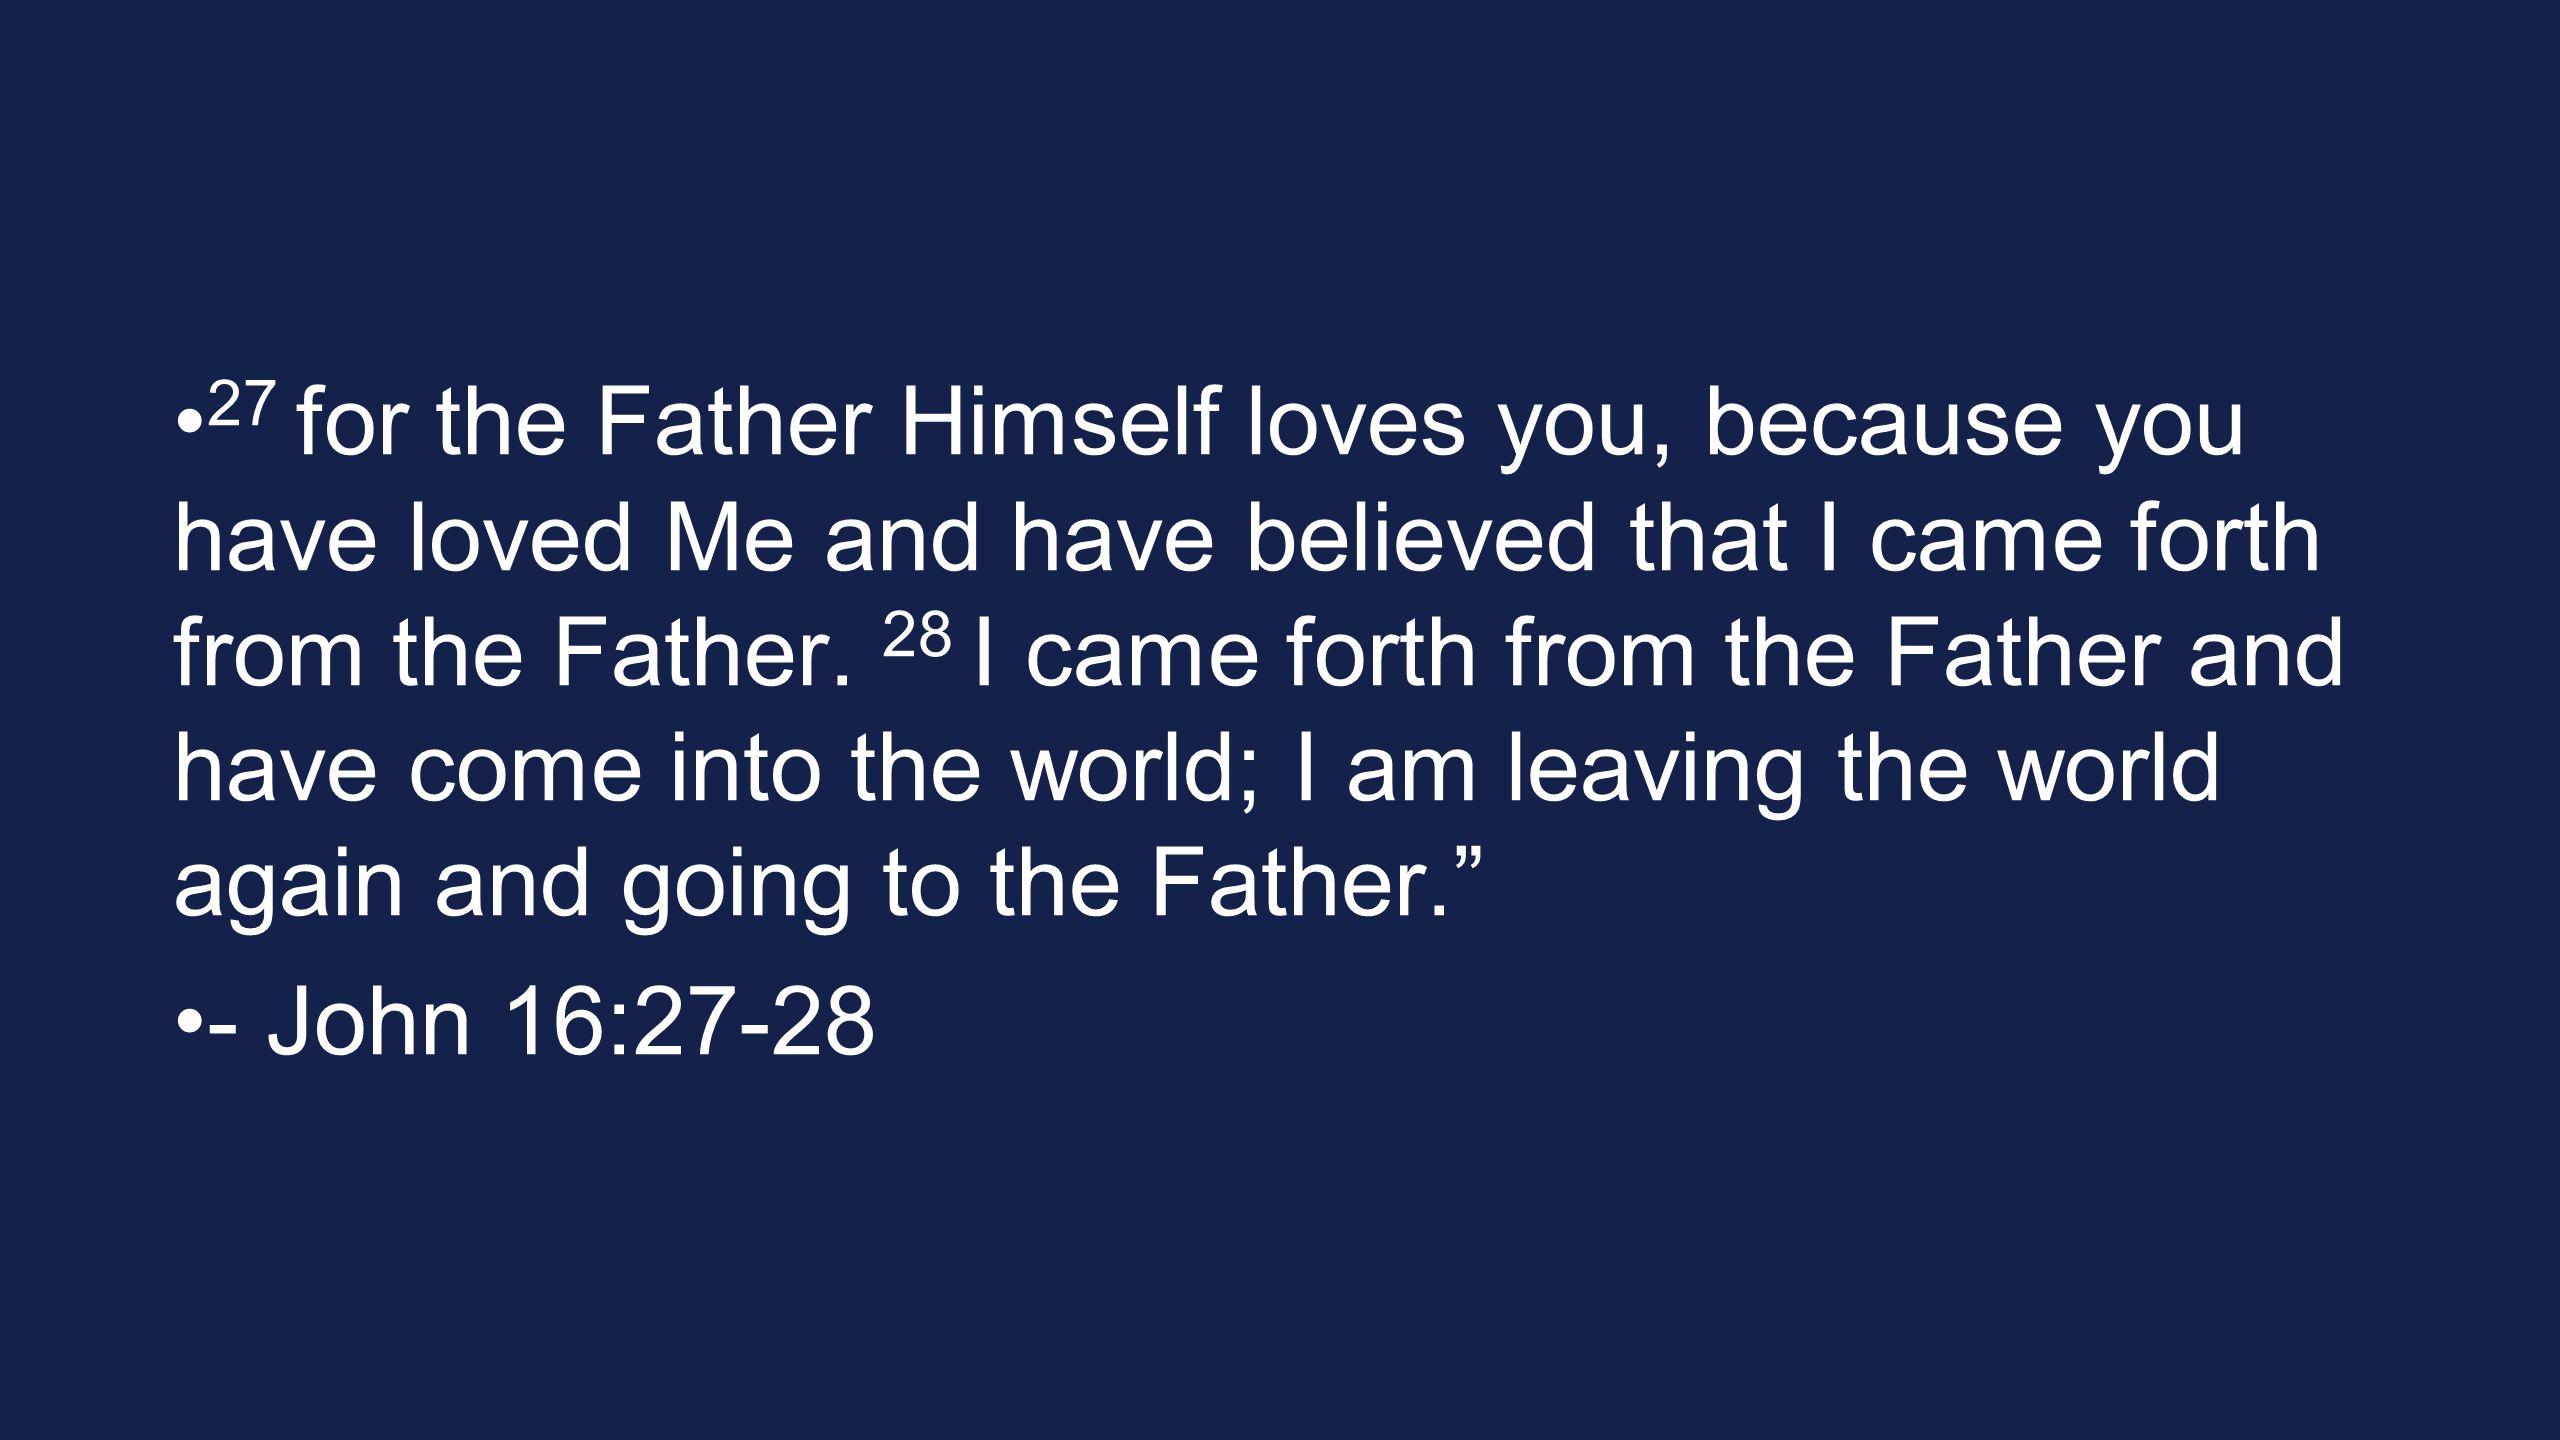 27 for the Father Himself loves you, because you have loved Me and have believed that I came forth from the Father.